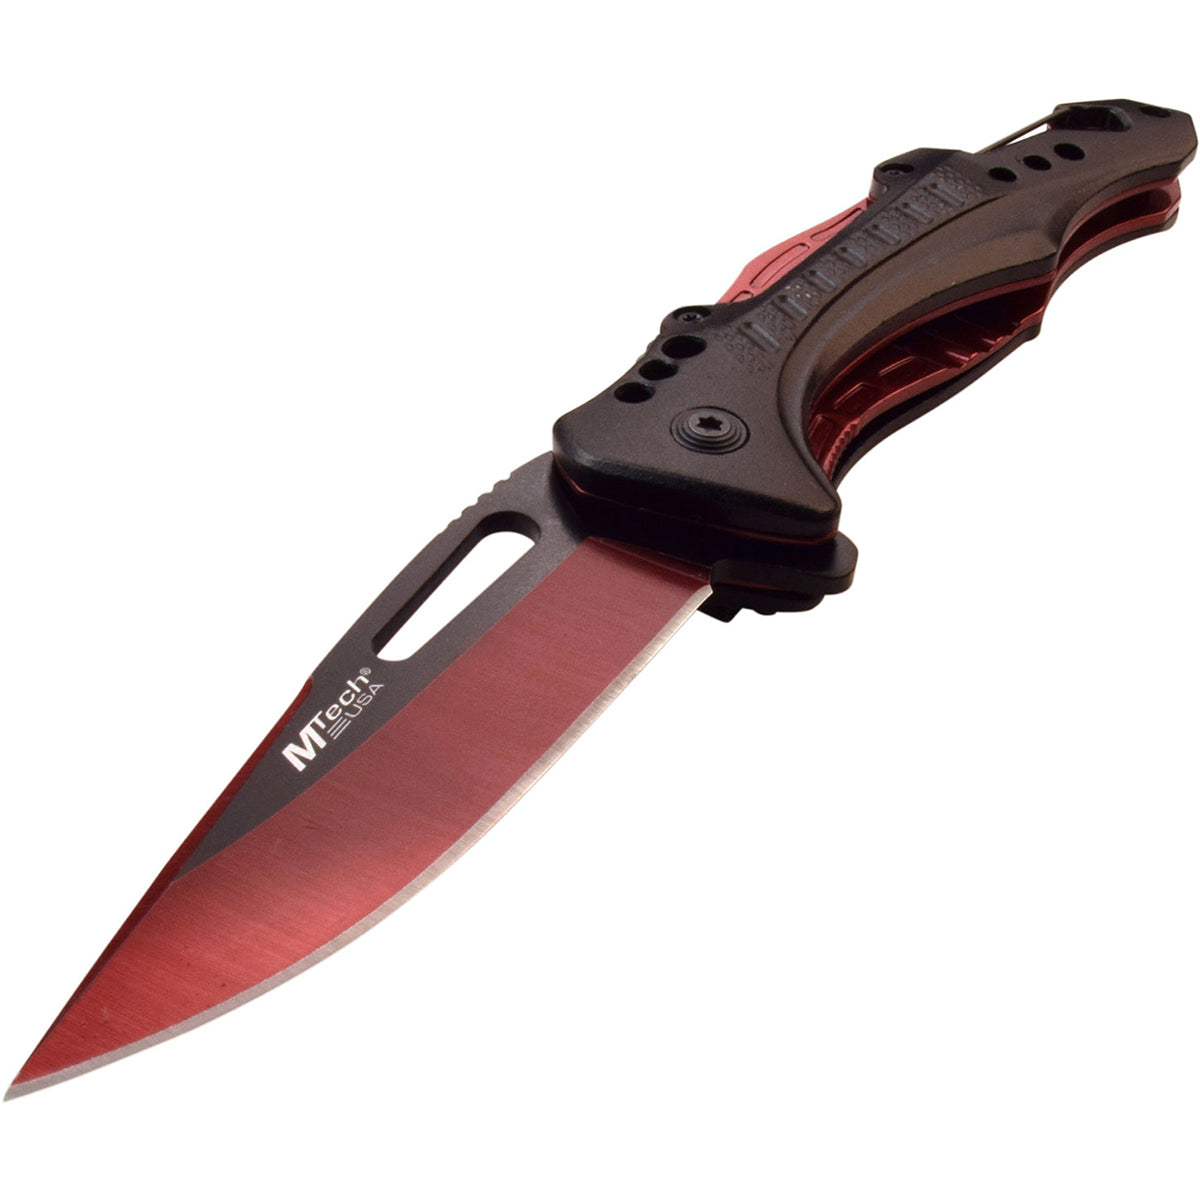 MTech USA Linerlock Spring Assisted Folding Knife, 3.5" Red Blade, MT-A705G2RD M-Tech